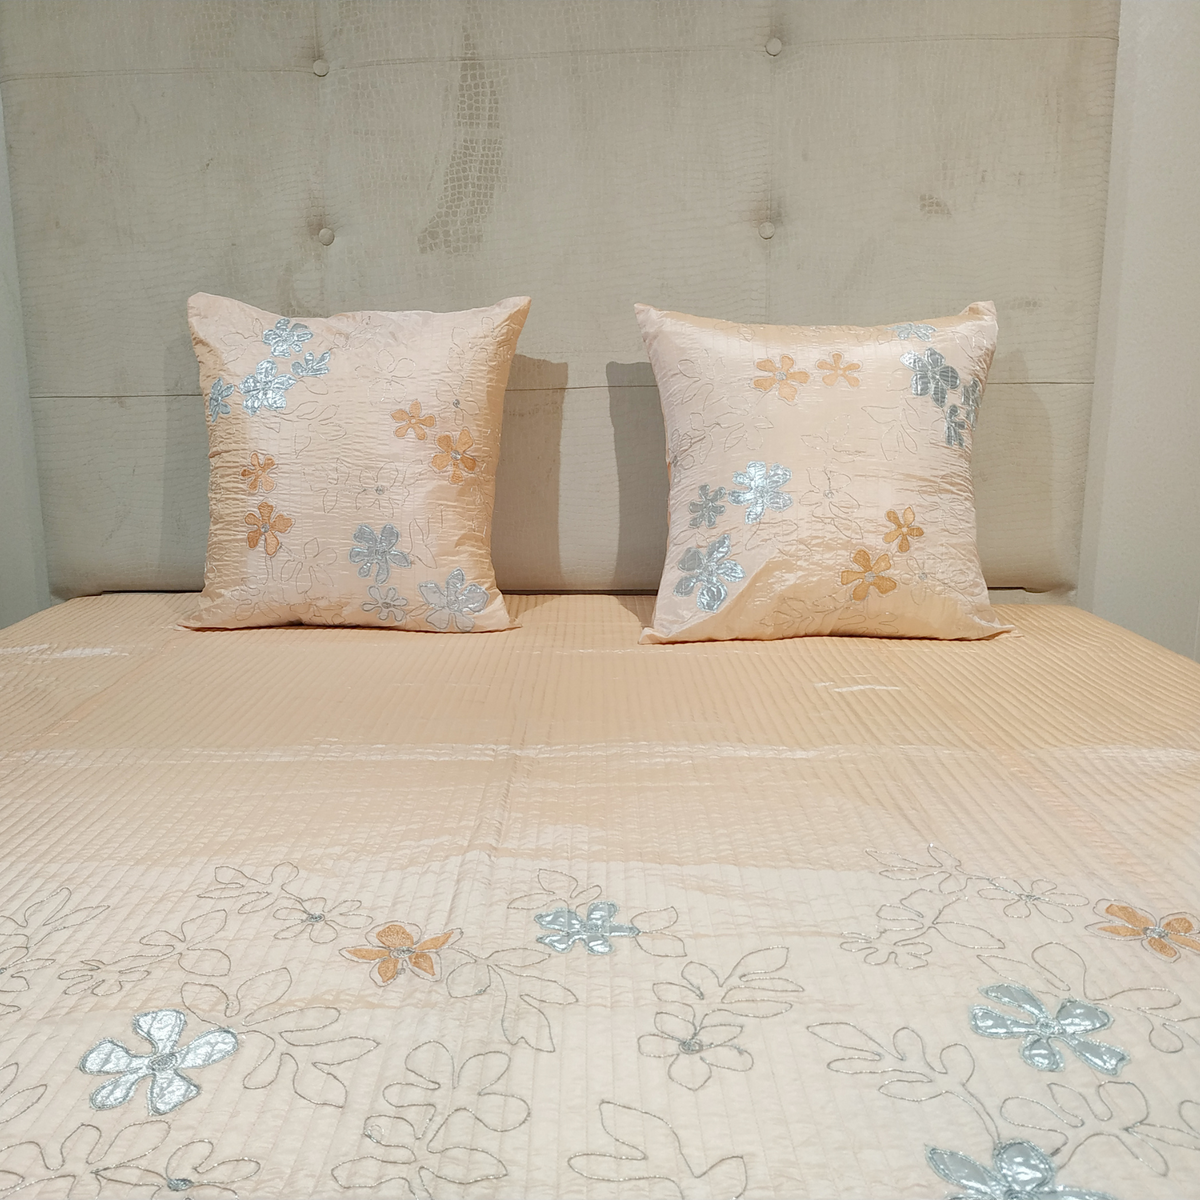 The LuxeLife Peach Bedcover